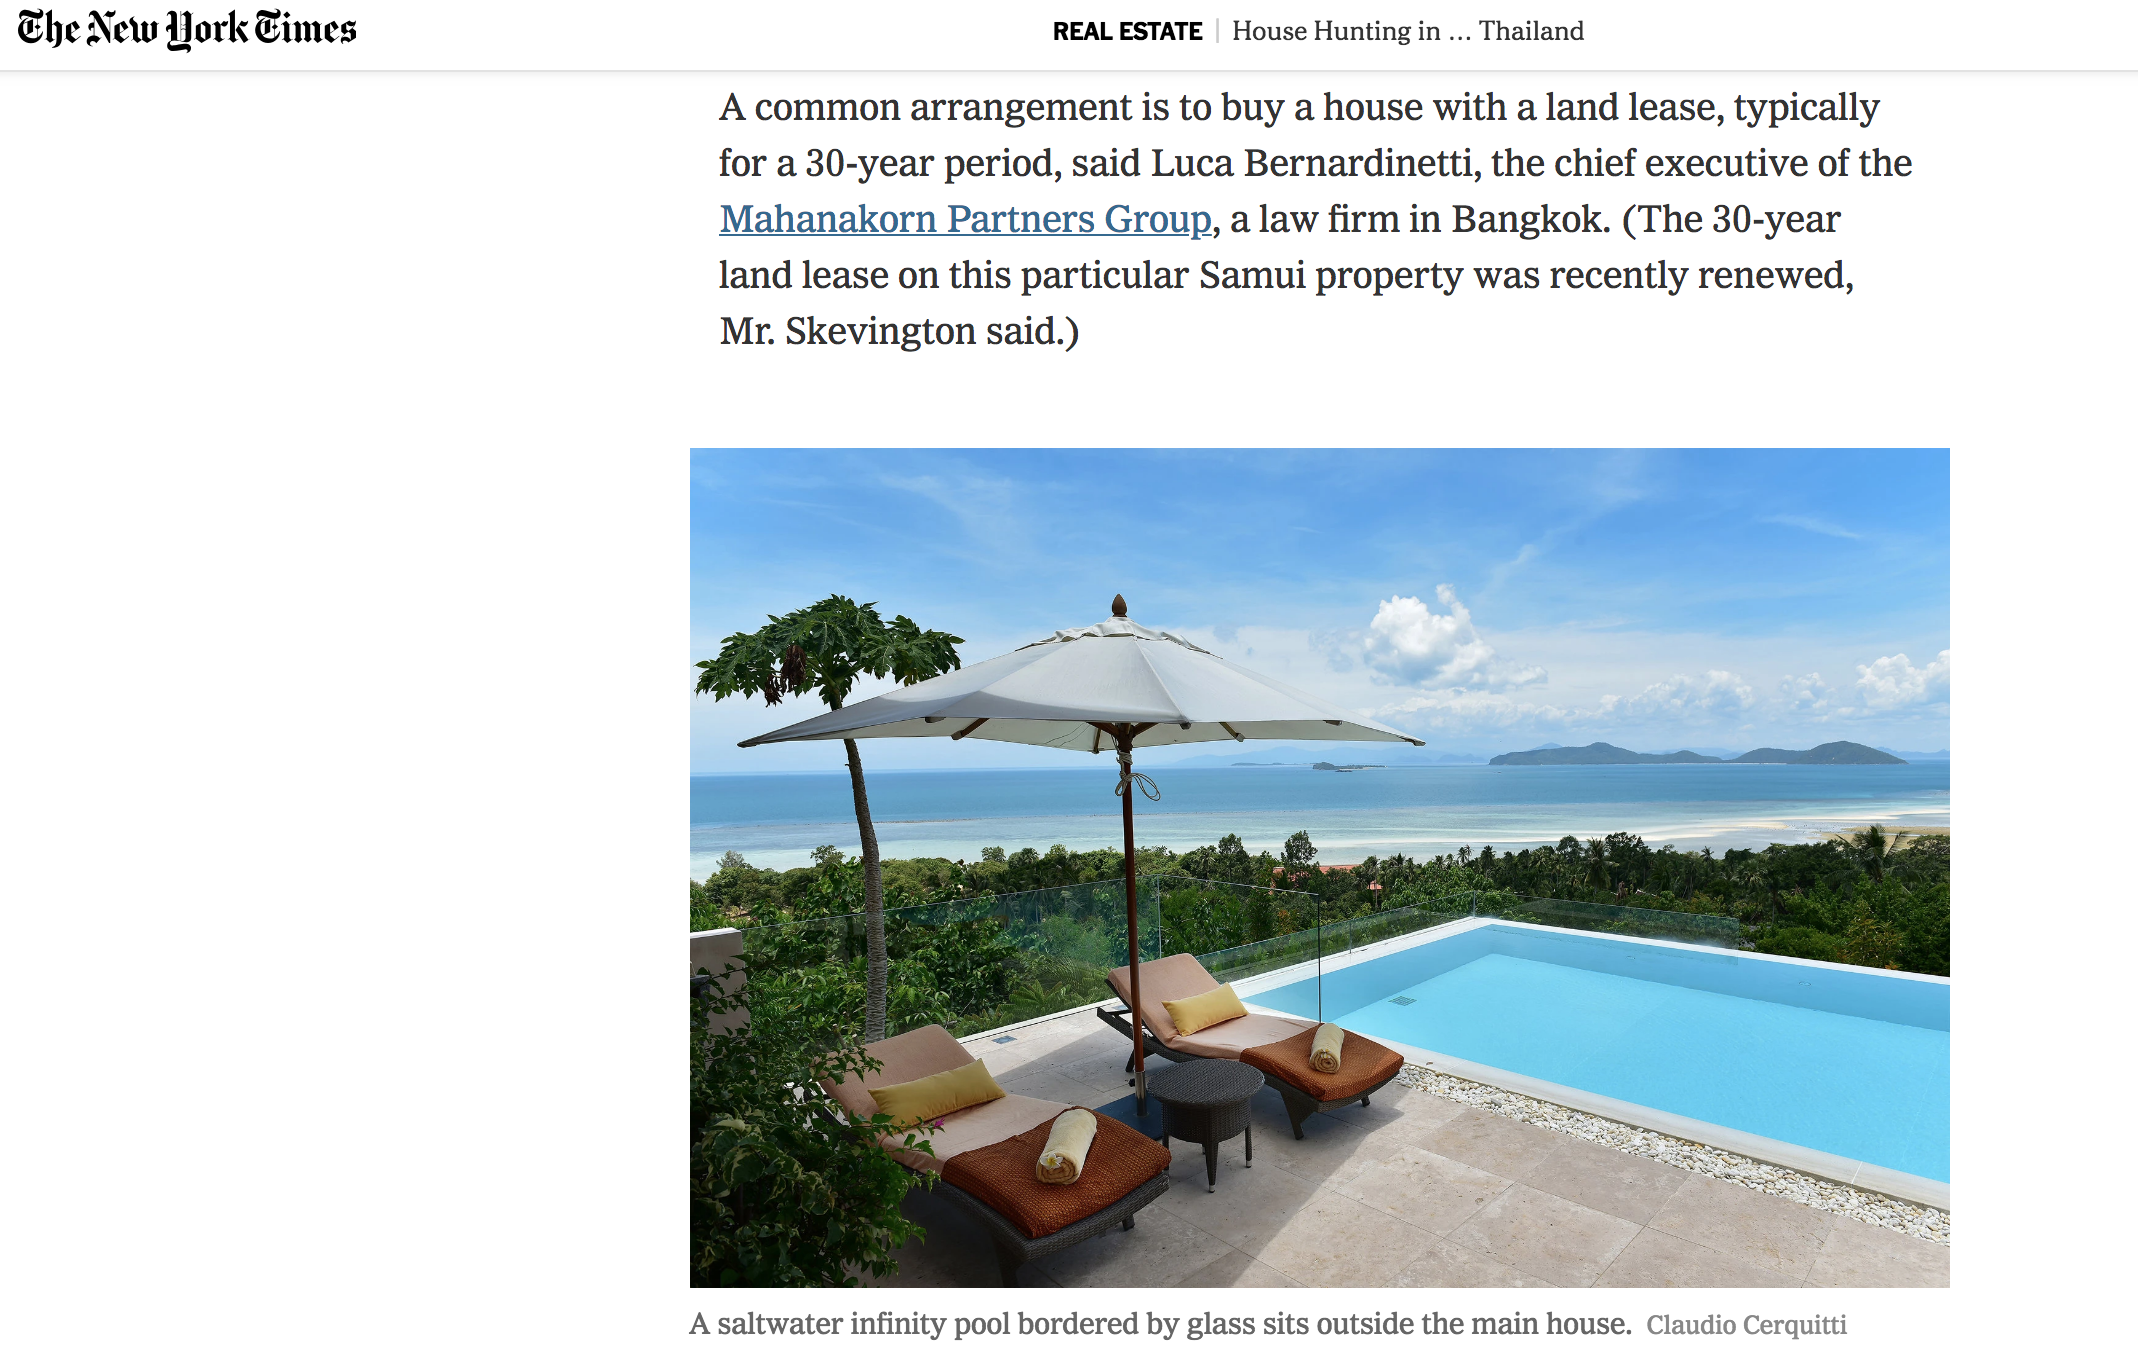 The New York Times Seeks Legal Advice from MPG on Thailand Property Market